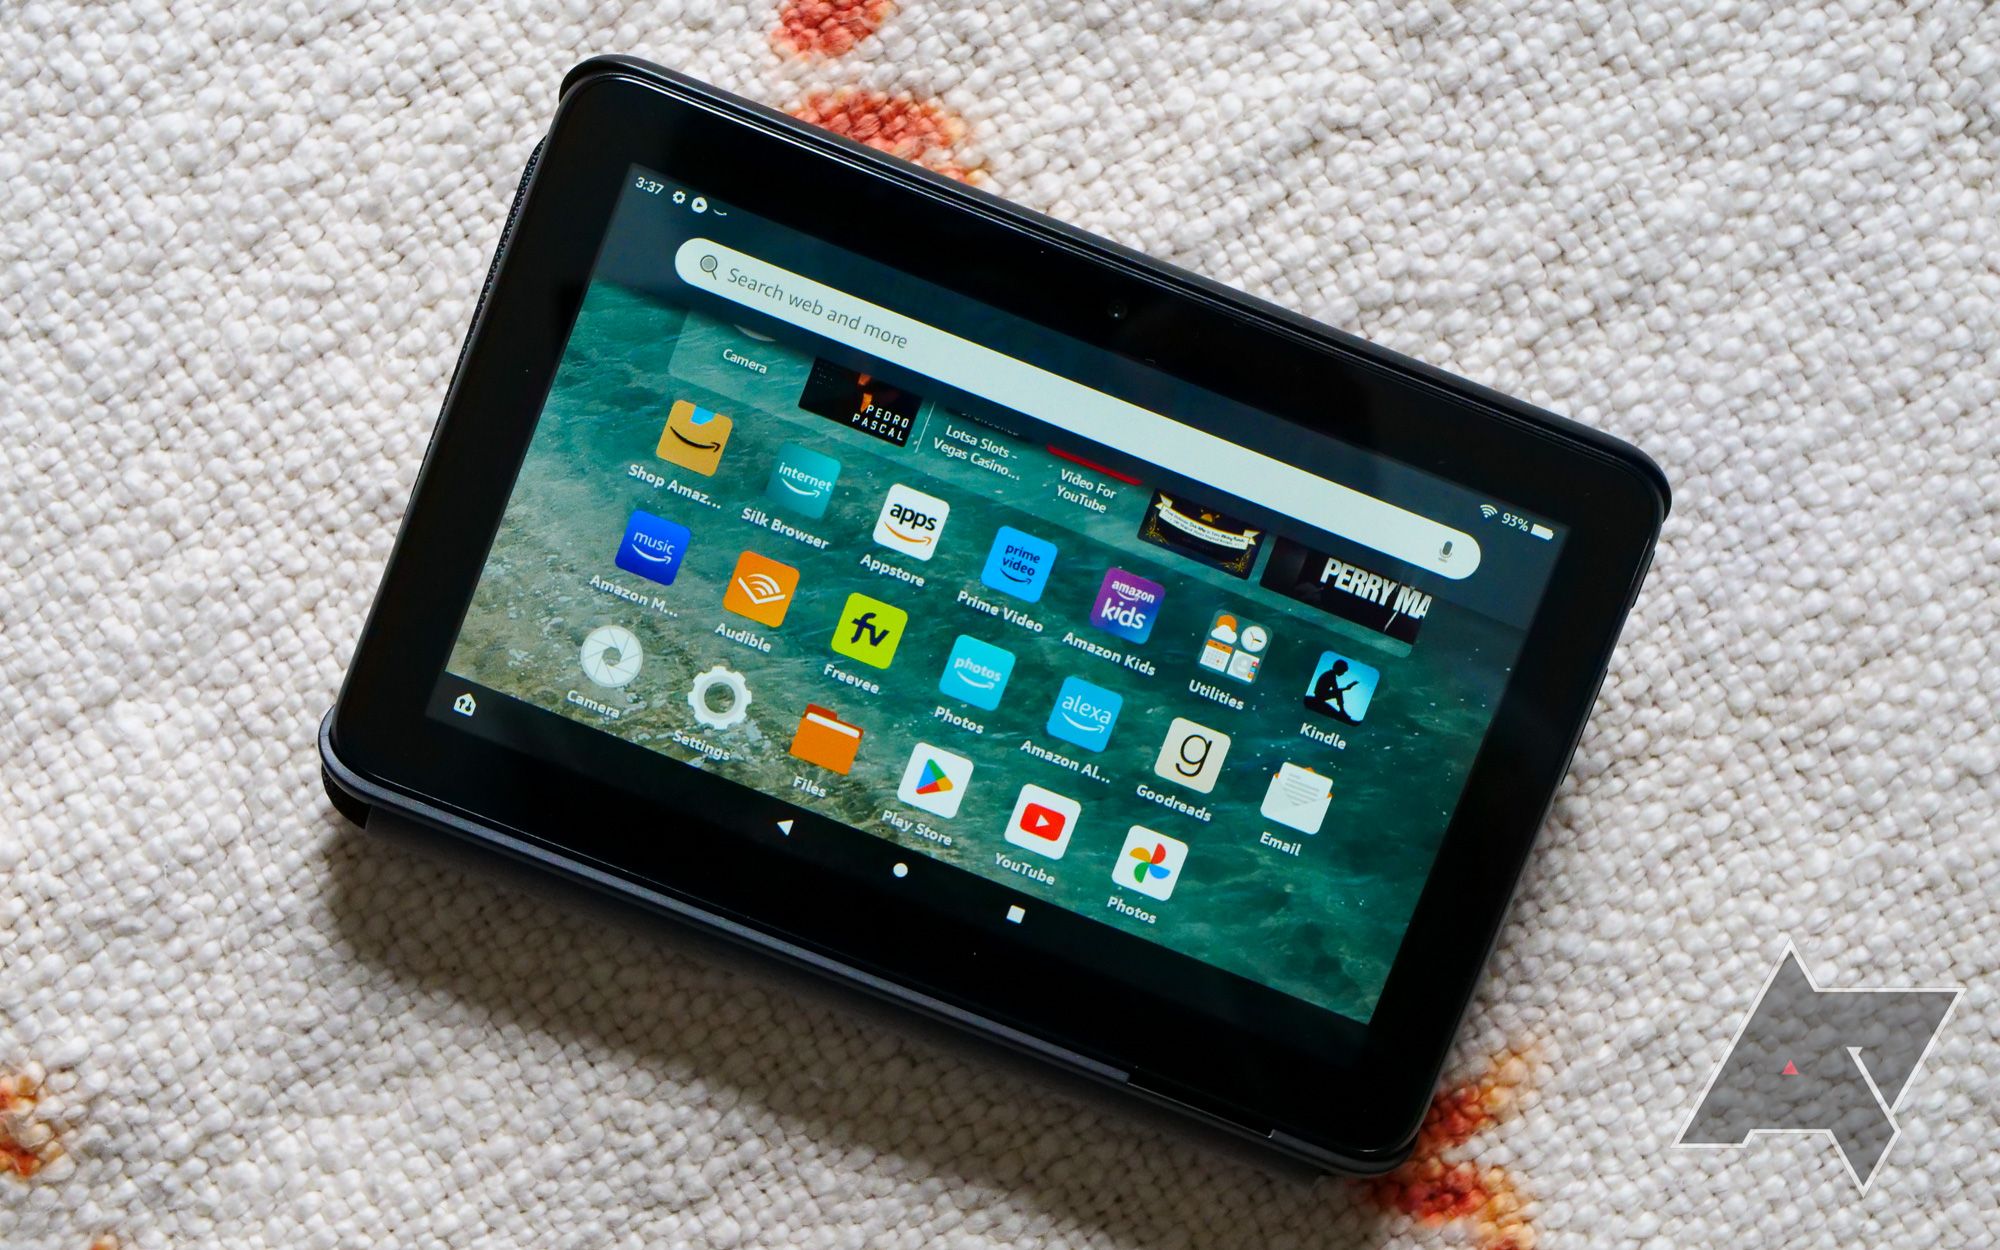 An Amazon Fire 7 tablet sitting on a blanket with the home screen displayed.